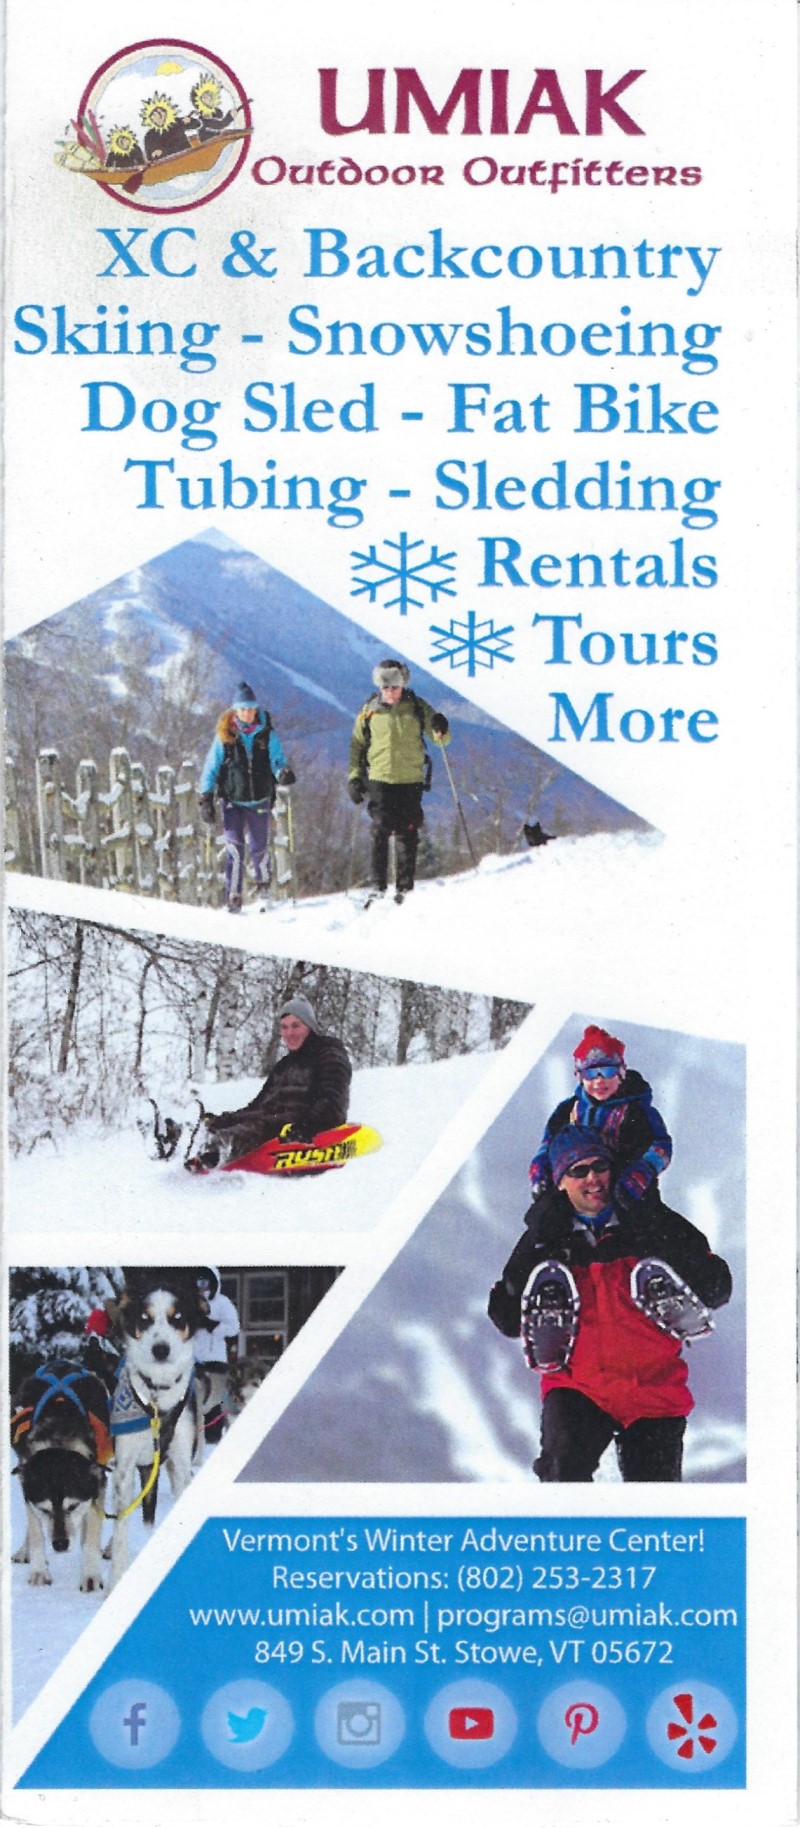 Umiak Outdoor Outfitters brochure thumbnail